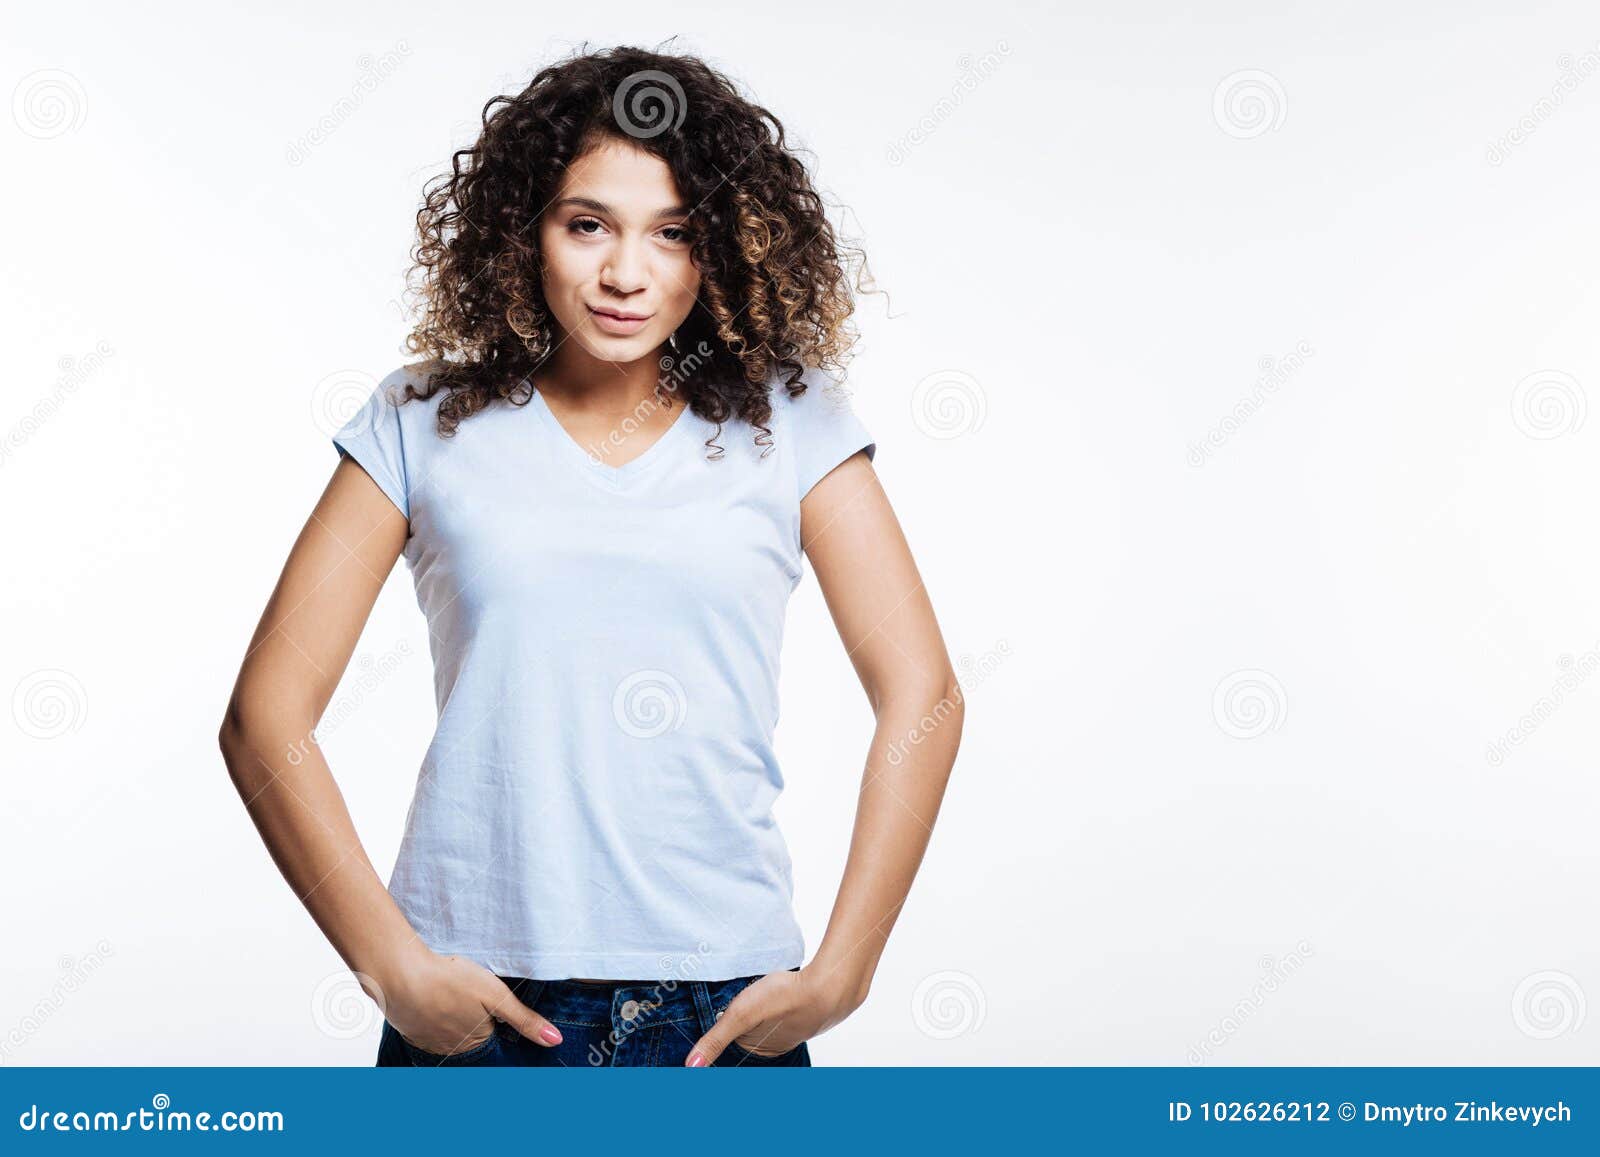 Curly Young Woman Posing with Her Hands in Pockets Stock Photo - Image ...